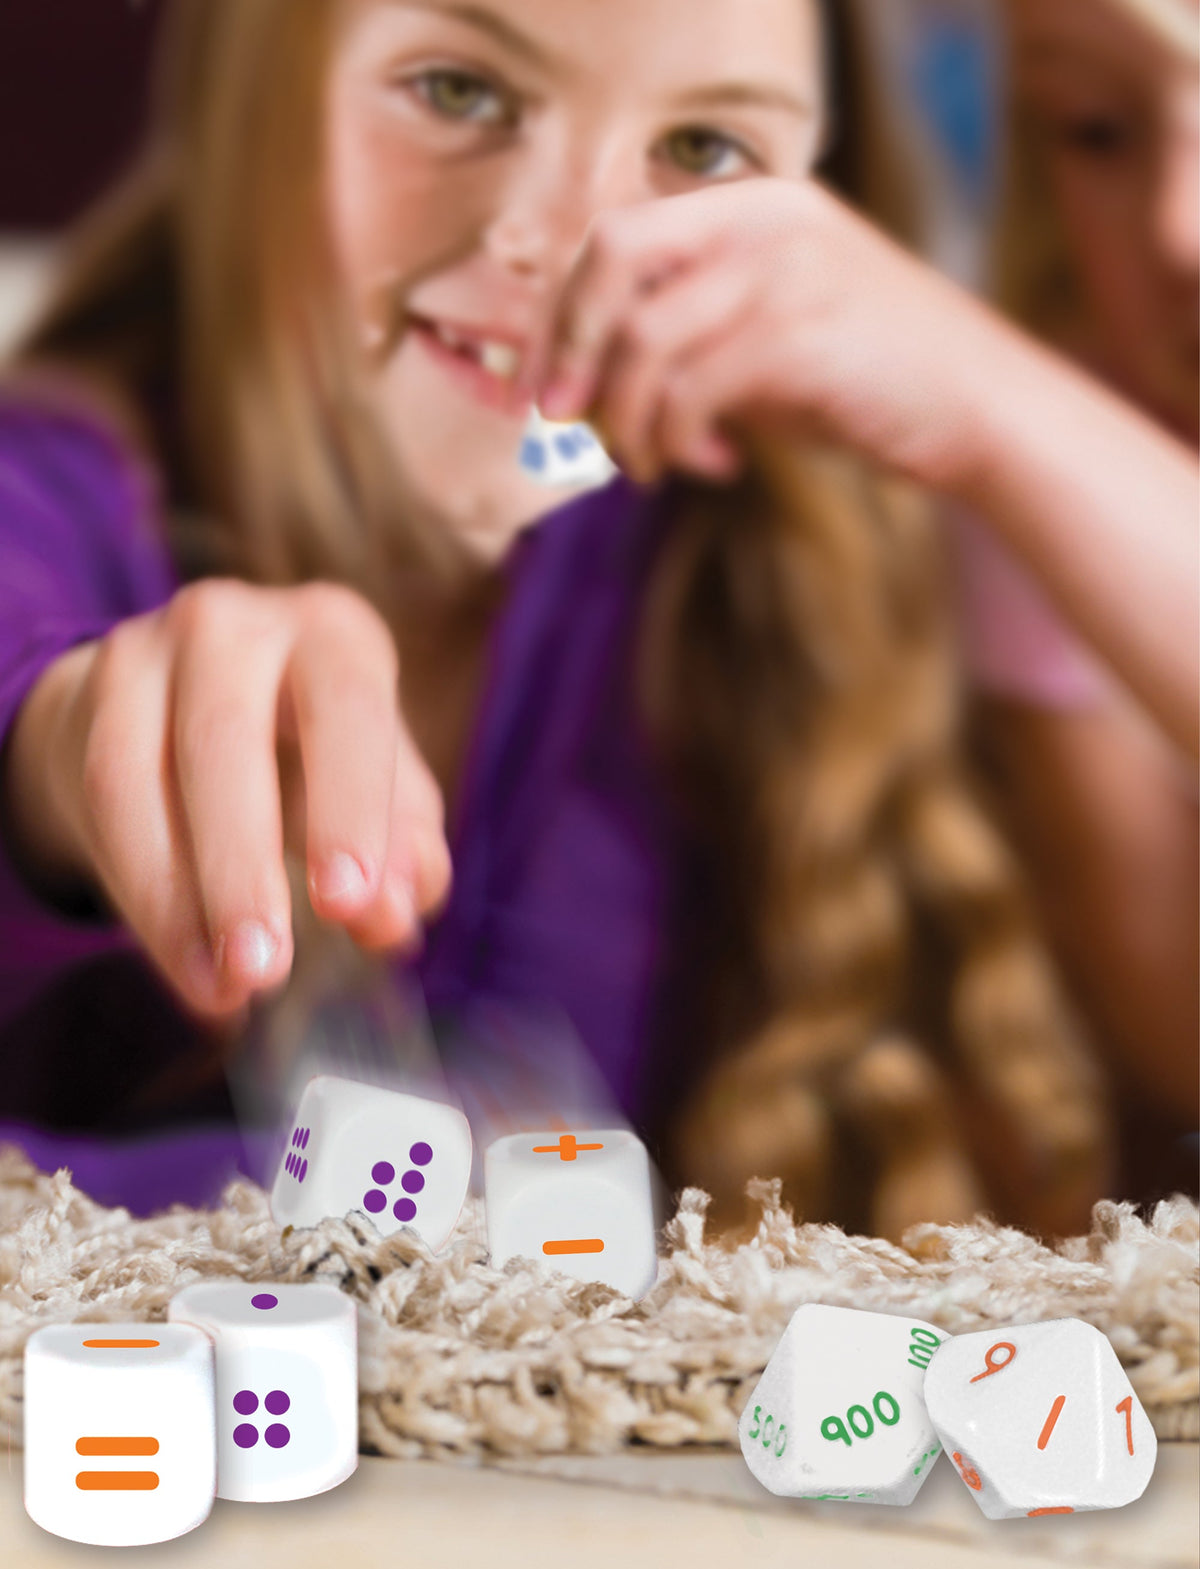 Sum Dice — Games for Young Minds